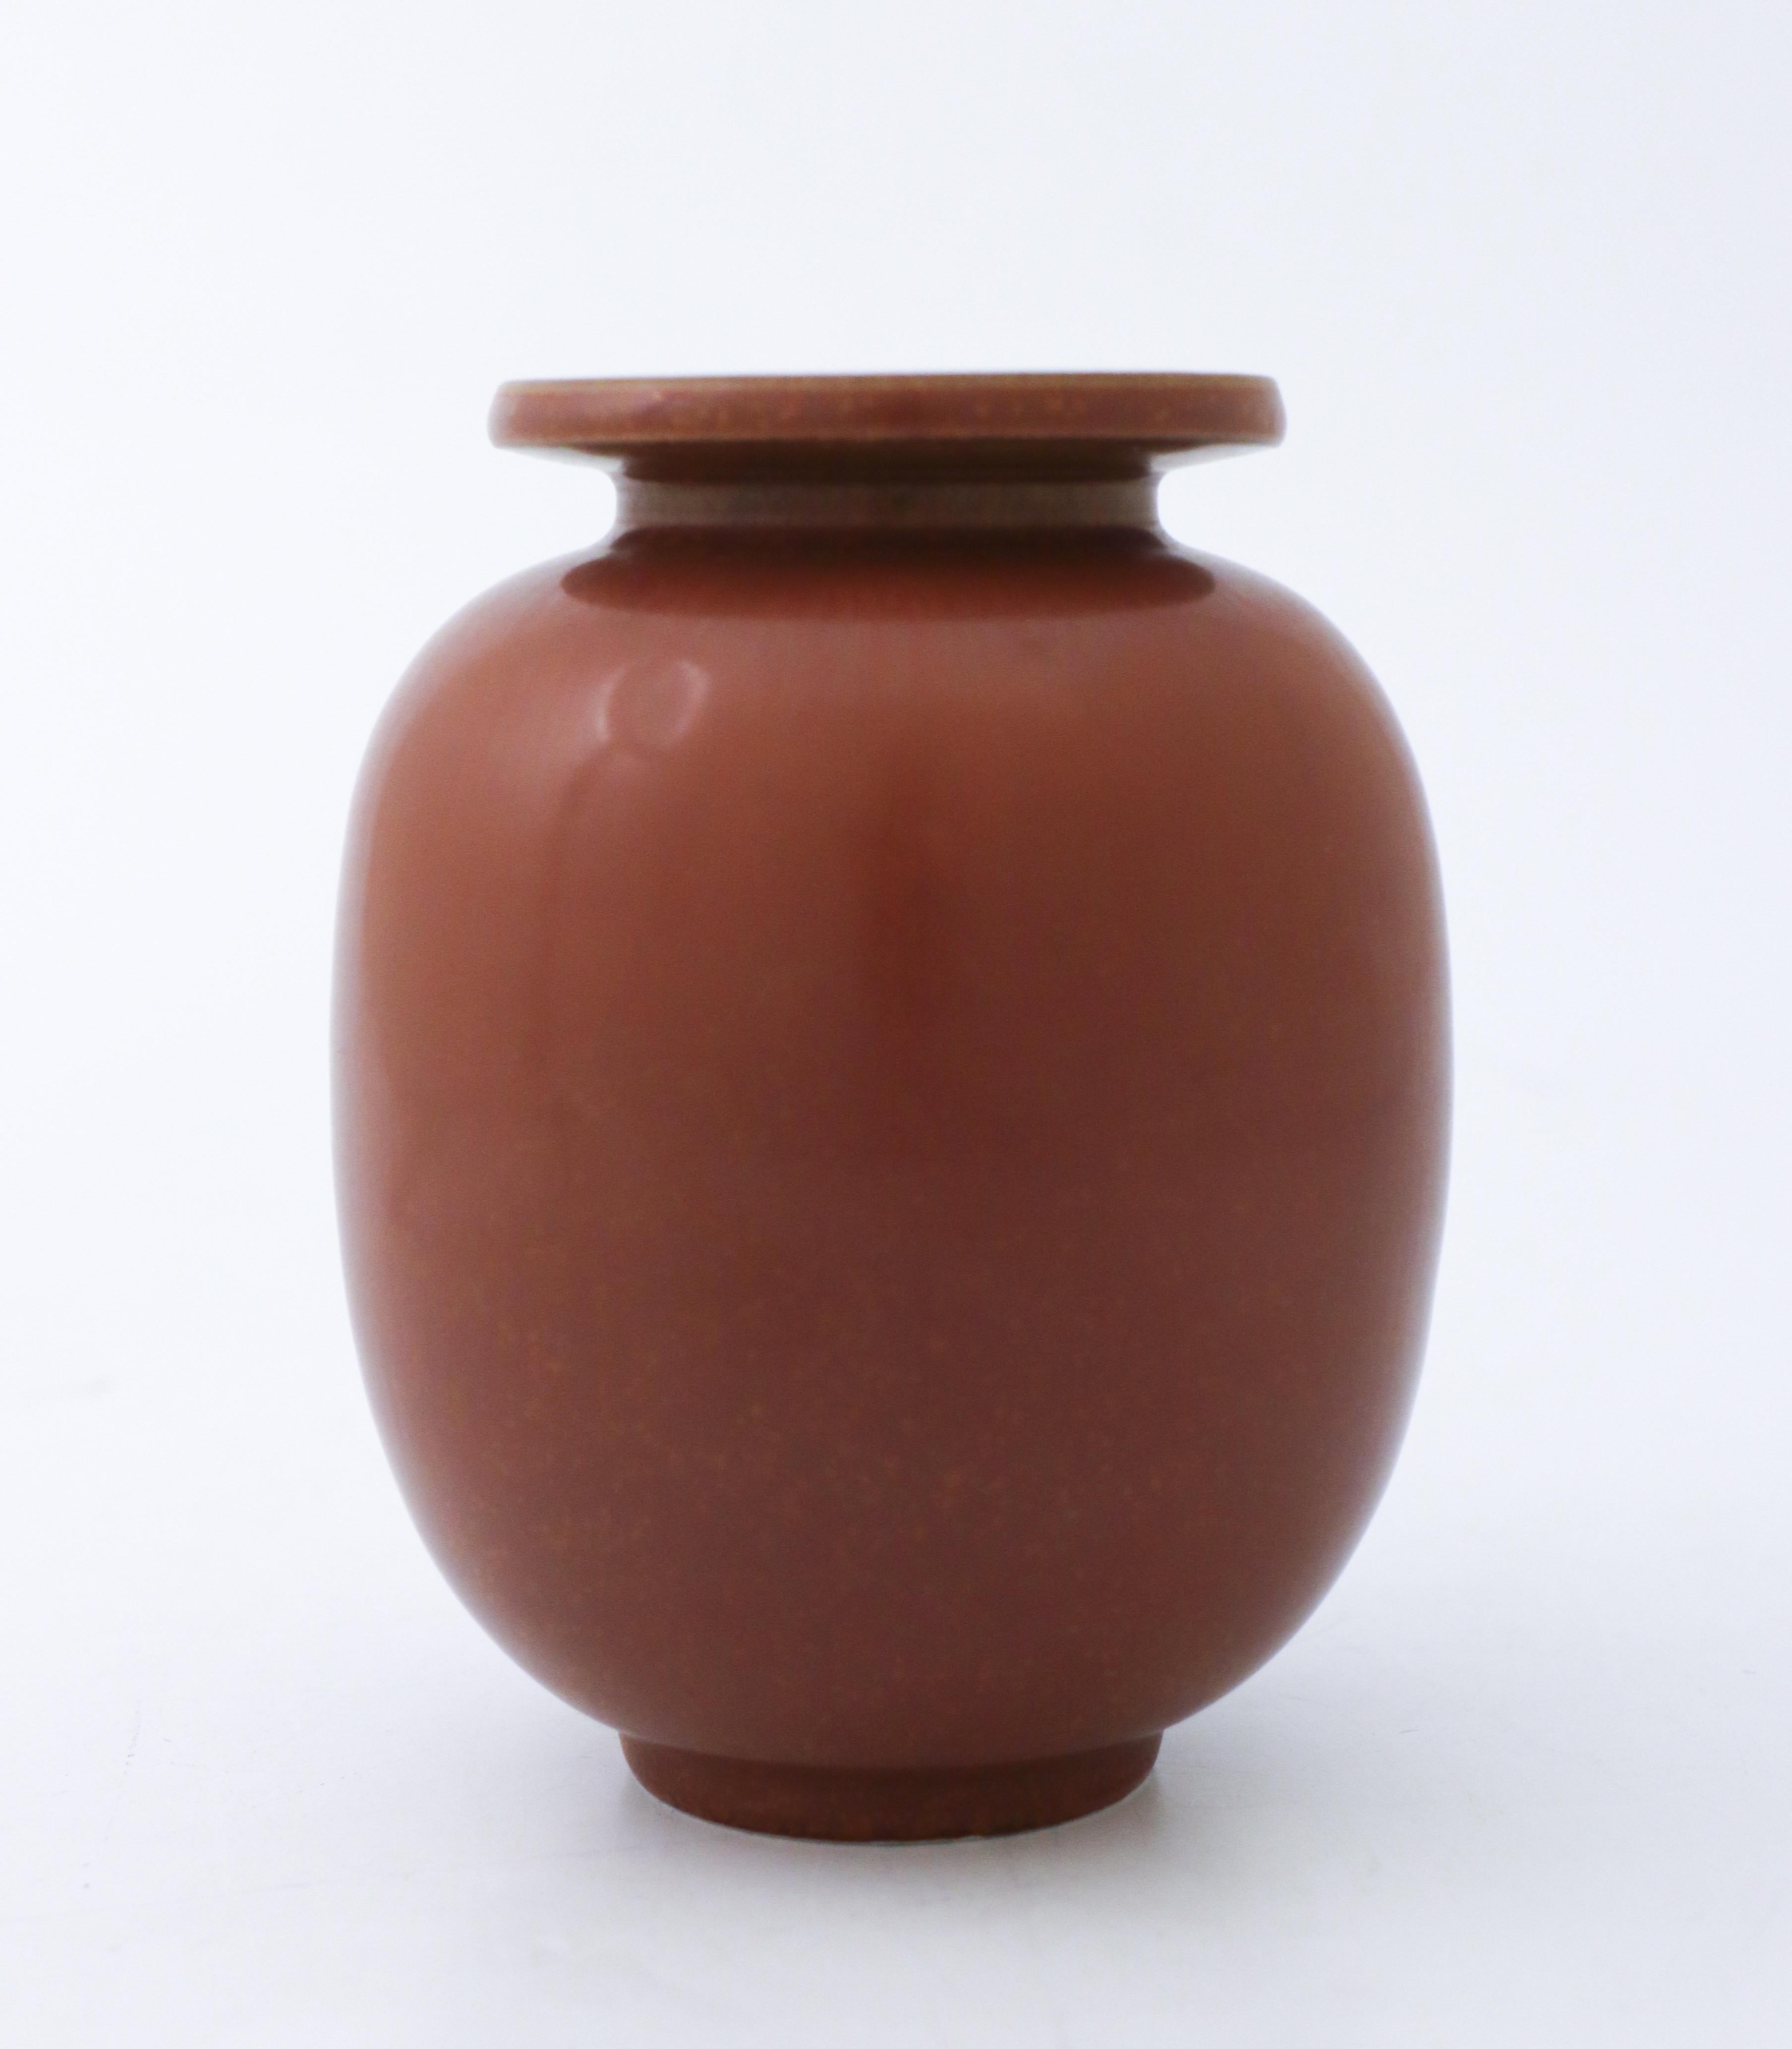 A brown vase designed by Gunnar Nylund at Rörstrand, it´s 13 cm (5.2) high. It´s in excellent condition and marked as 1st quality. 

Gunnar Nylund was born in Paris 1904 with parents who worked as sculptors and designer so he really soon started